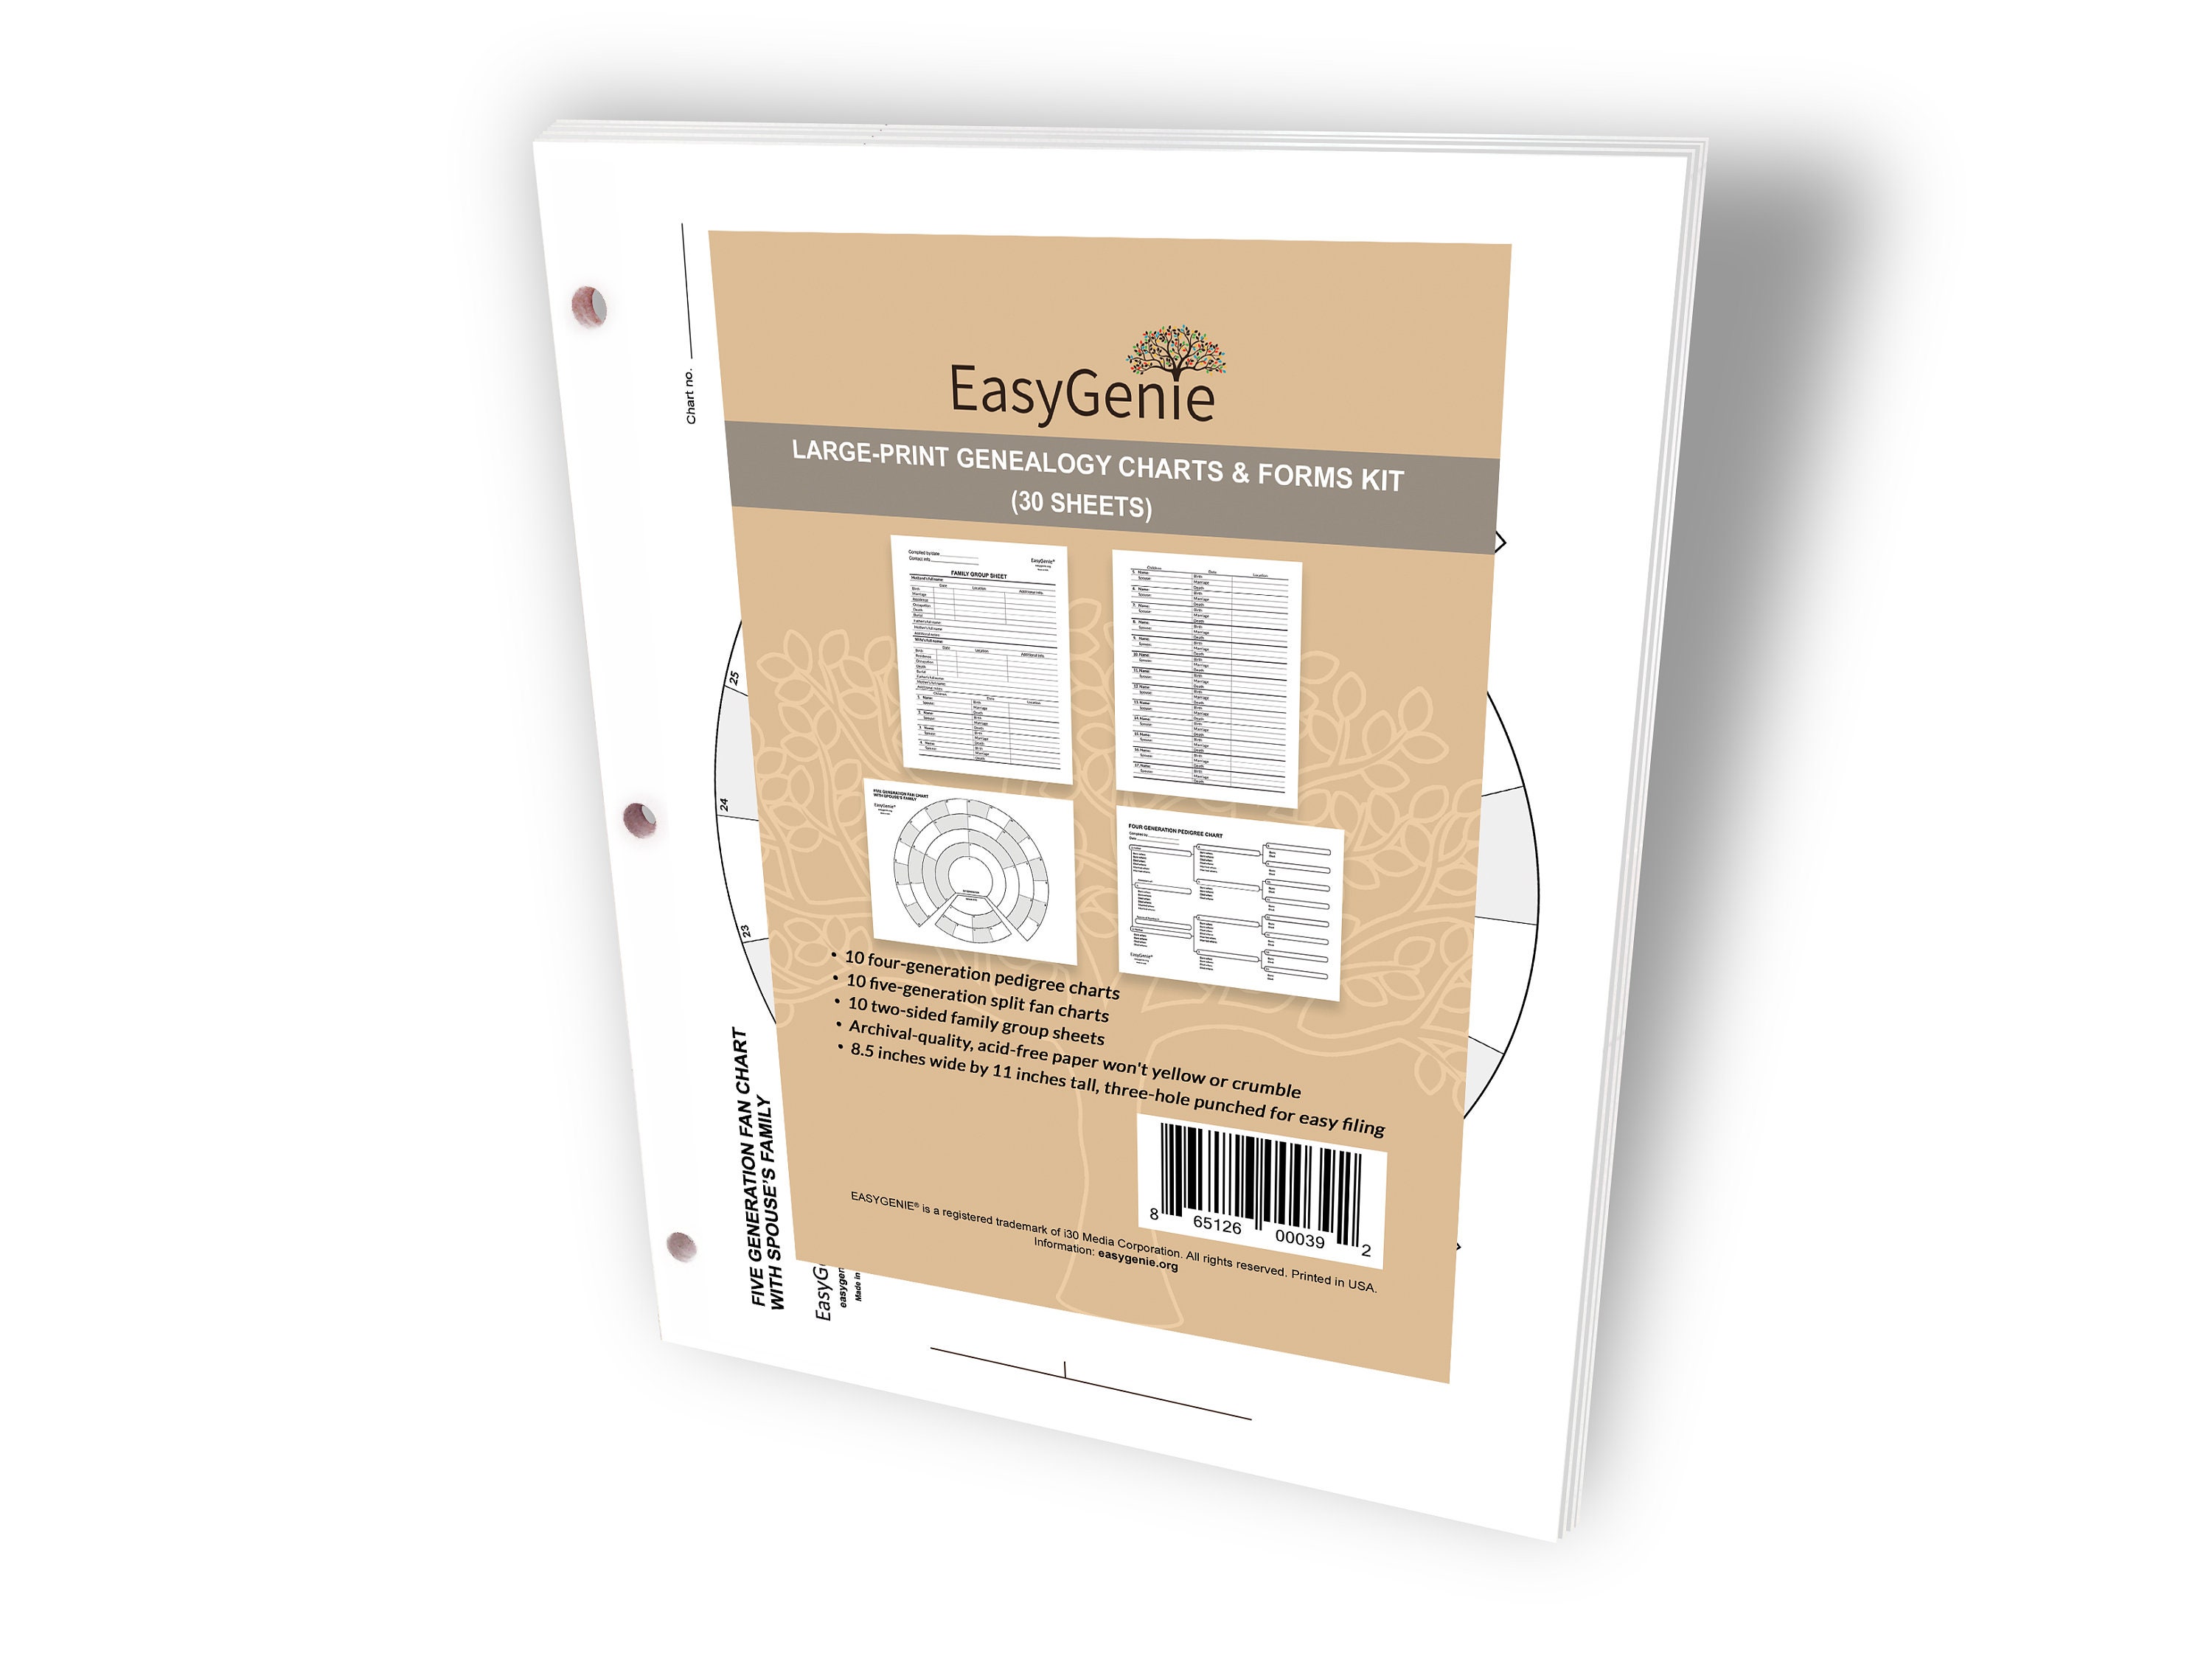 EASYGENIE Large Print Two-Sided Family Group Sheets for Ancestry 30 Sheets Archival-Quality Genealogy Forms